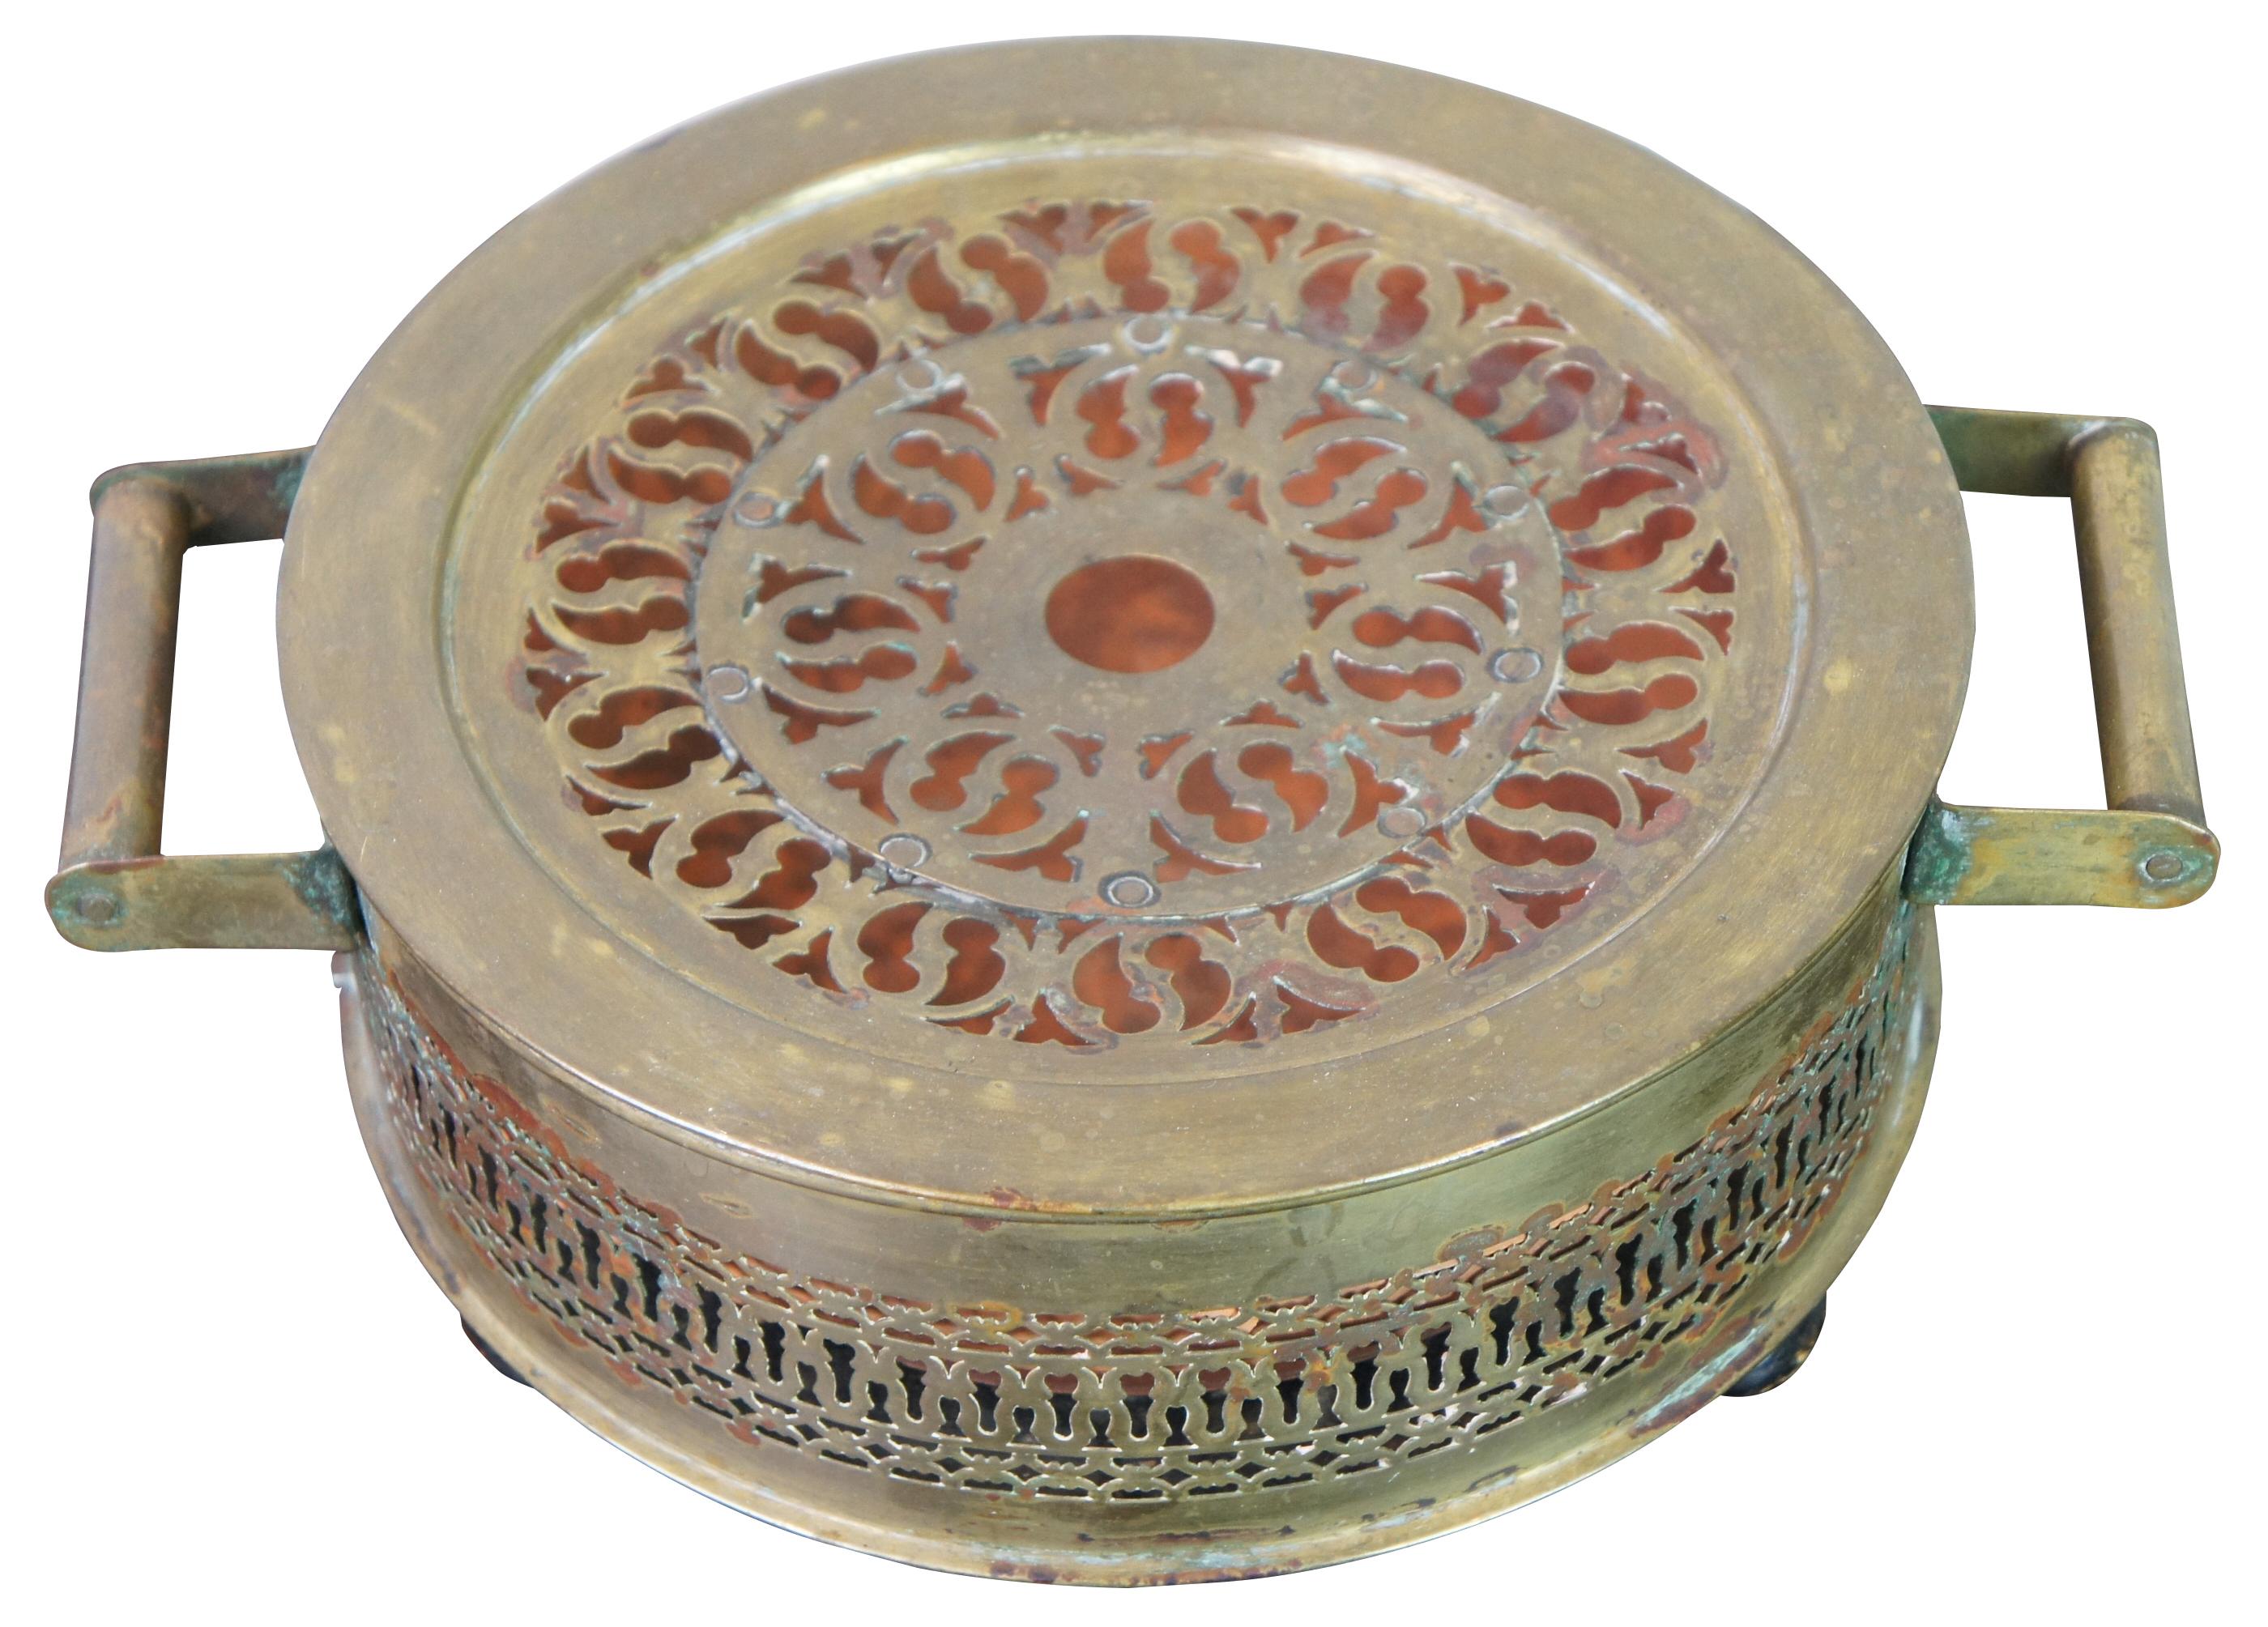 Antique French Victorian reticulated brass foot warmer featuring turned feet, handles and terracota insert. Measure: 11